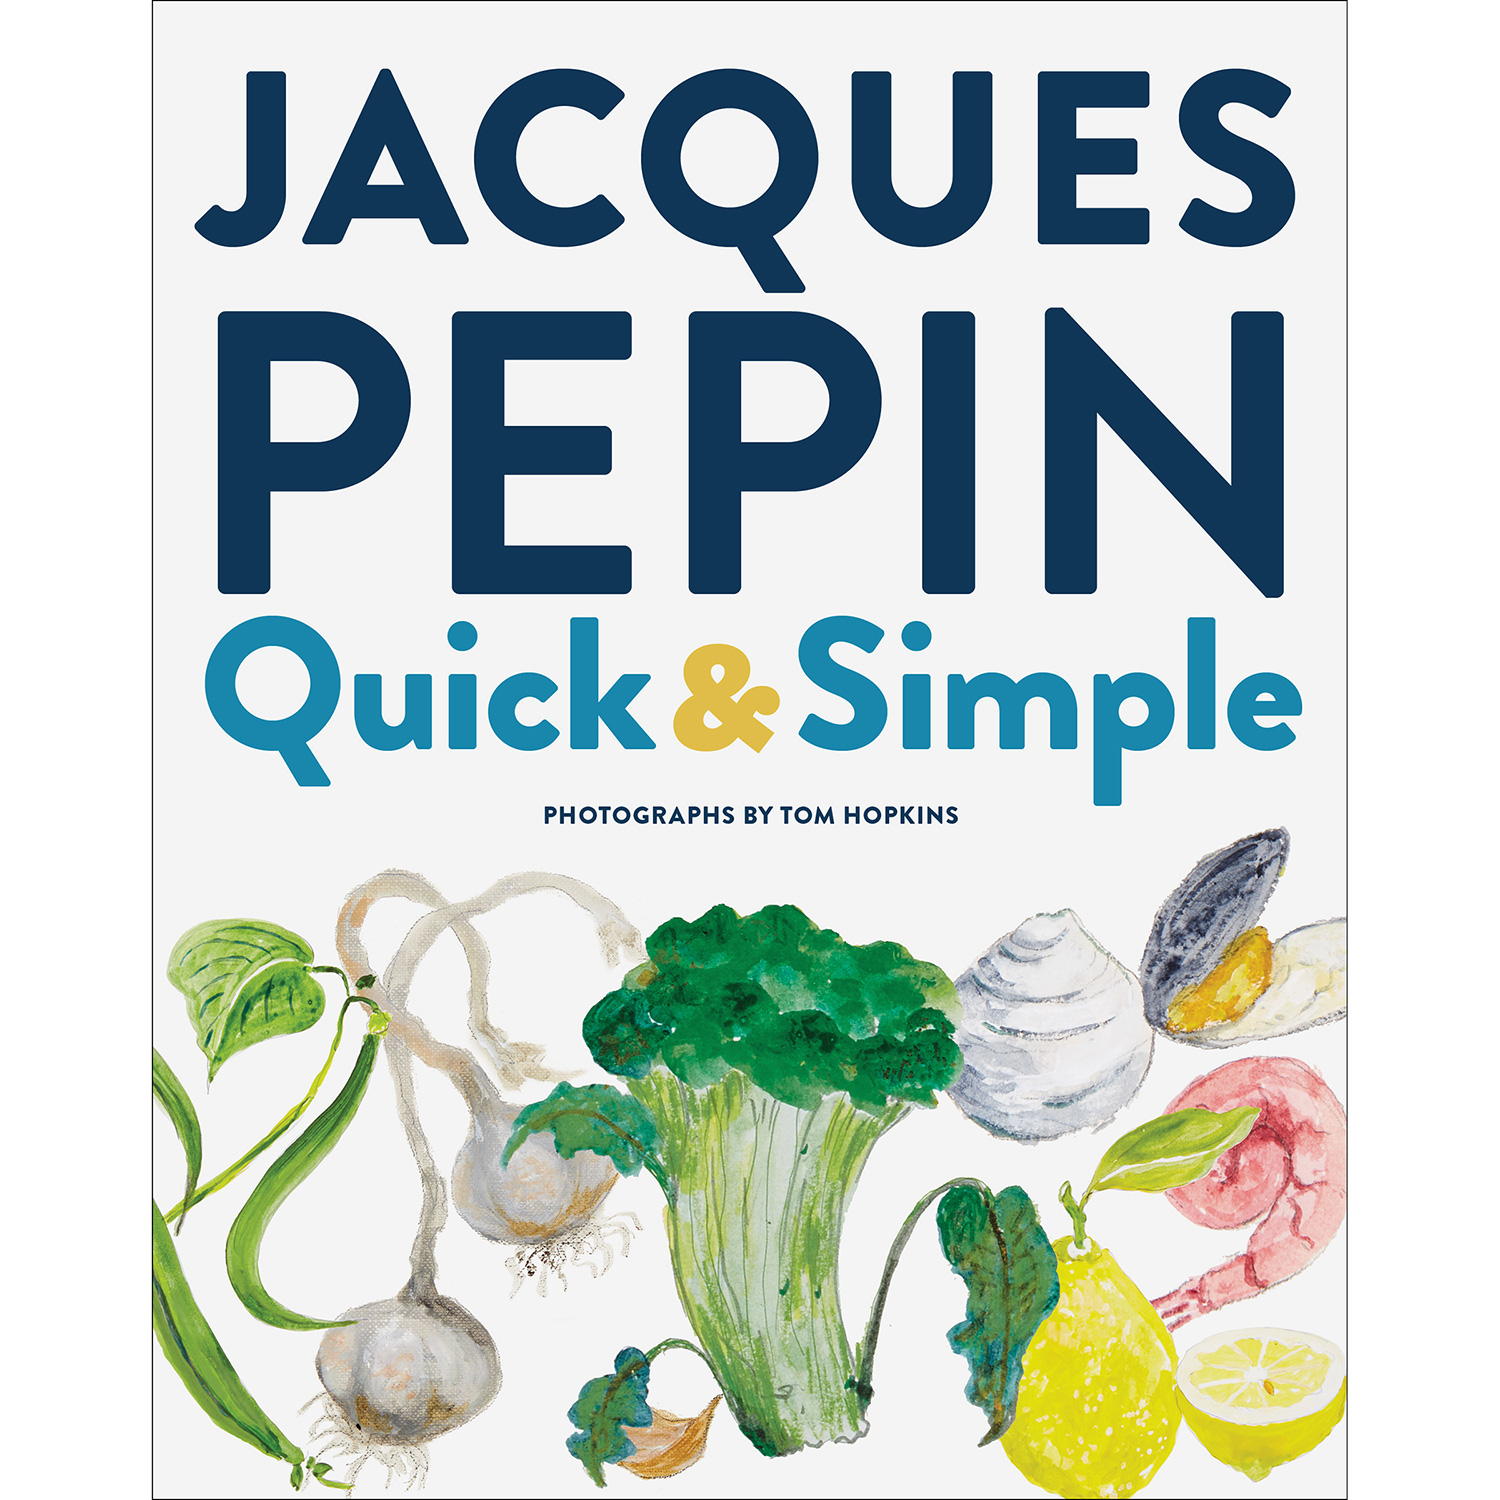 Art of the Chicken” Book Individually Signed by Jacques Pepin